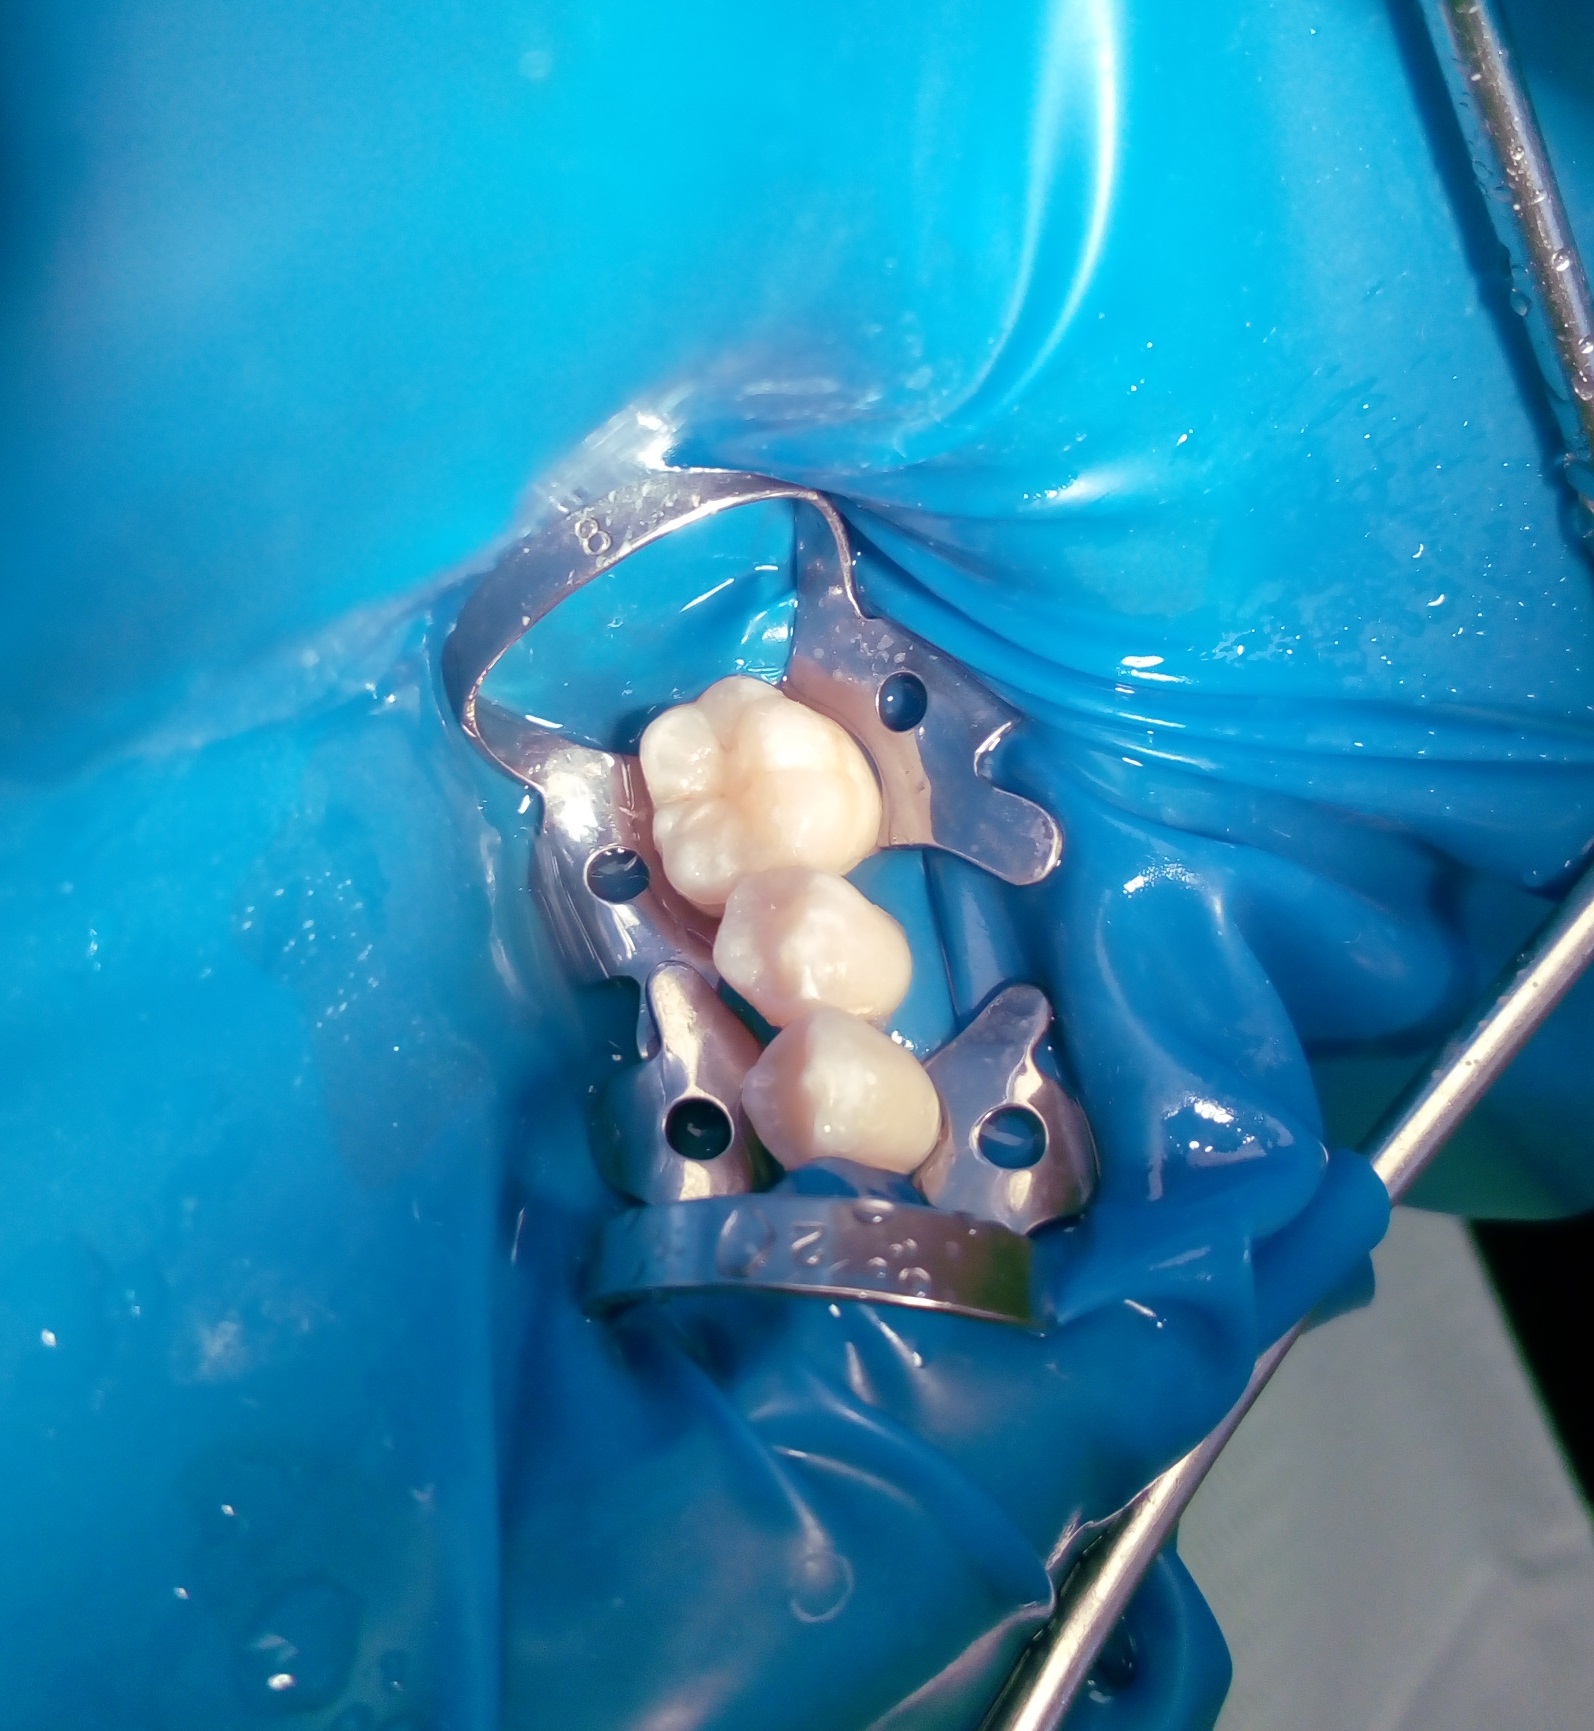 Conservative tooth decay treatment by composite fillings